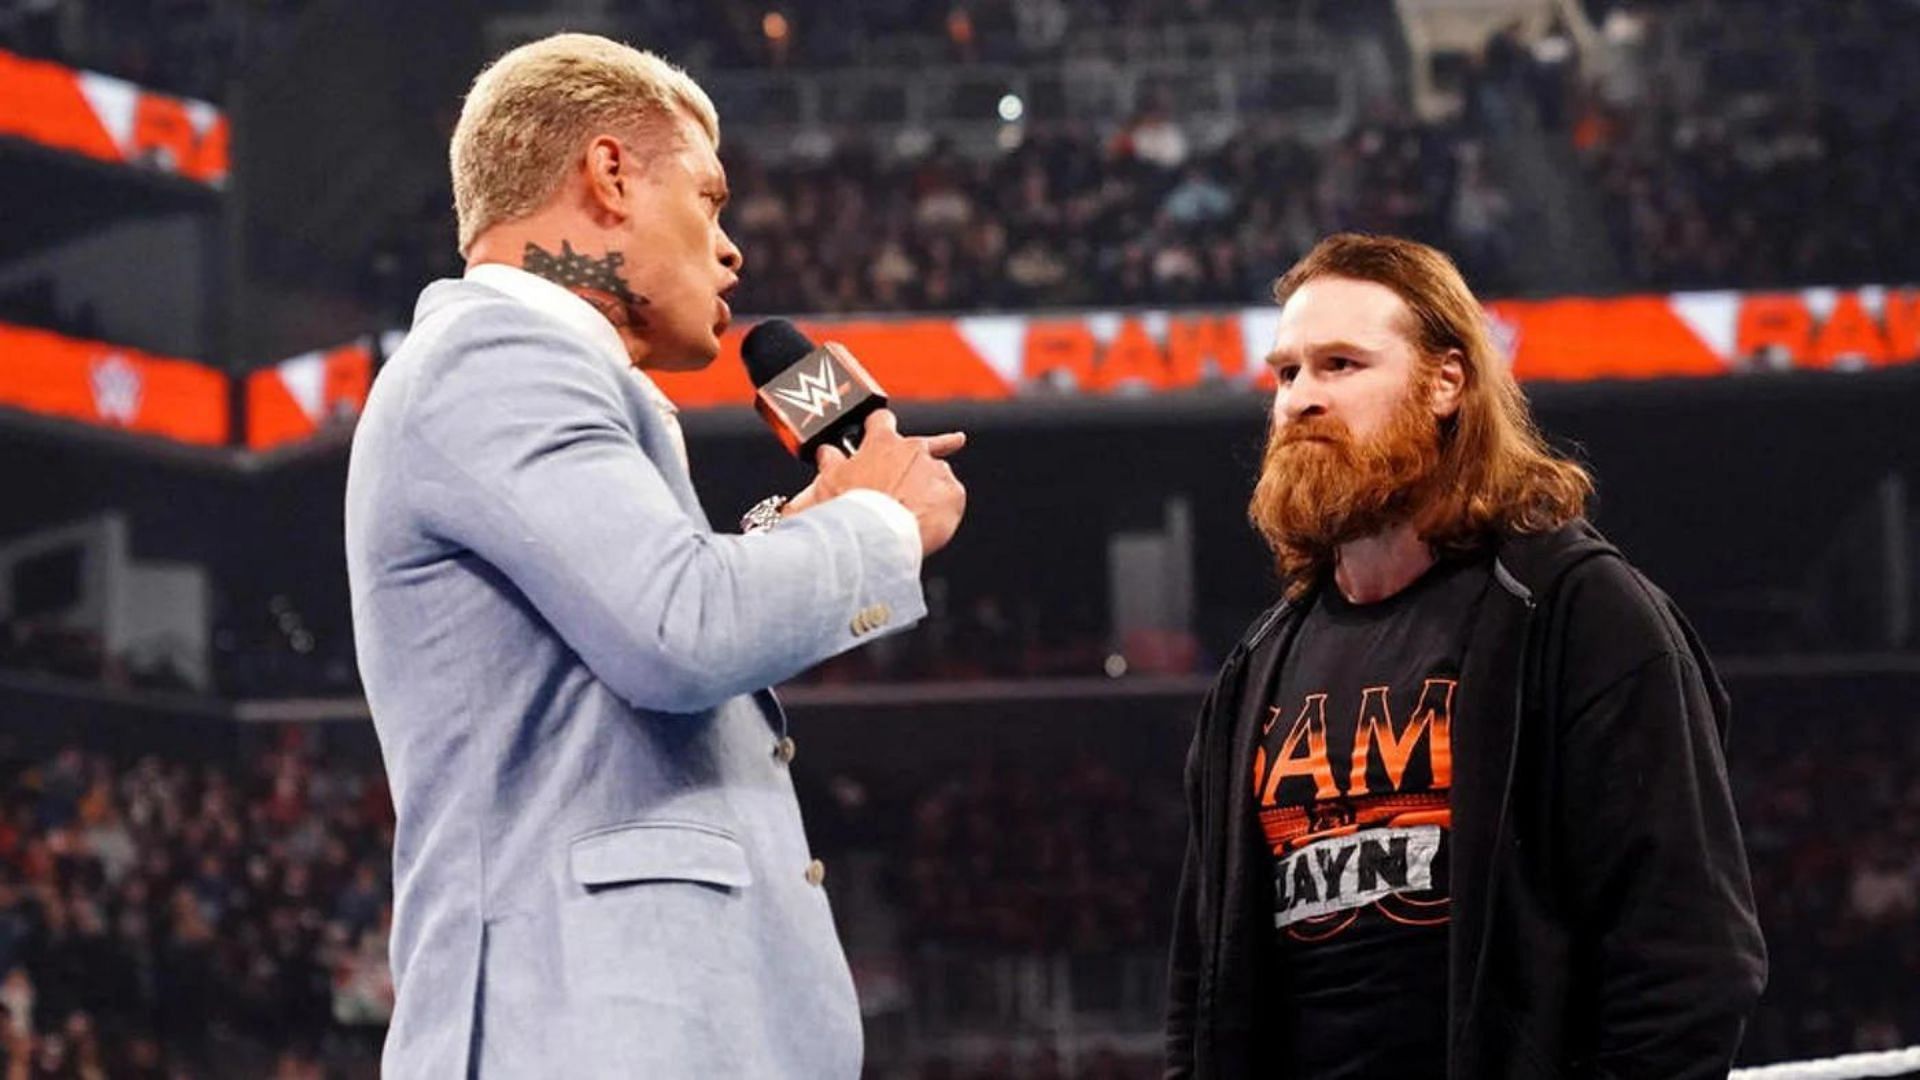 Cody Rhodes and Sami Zayn came face-to-face on RAW